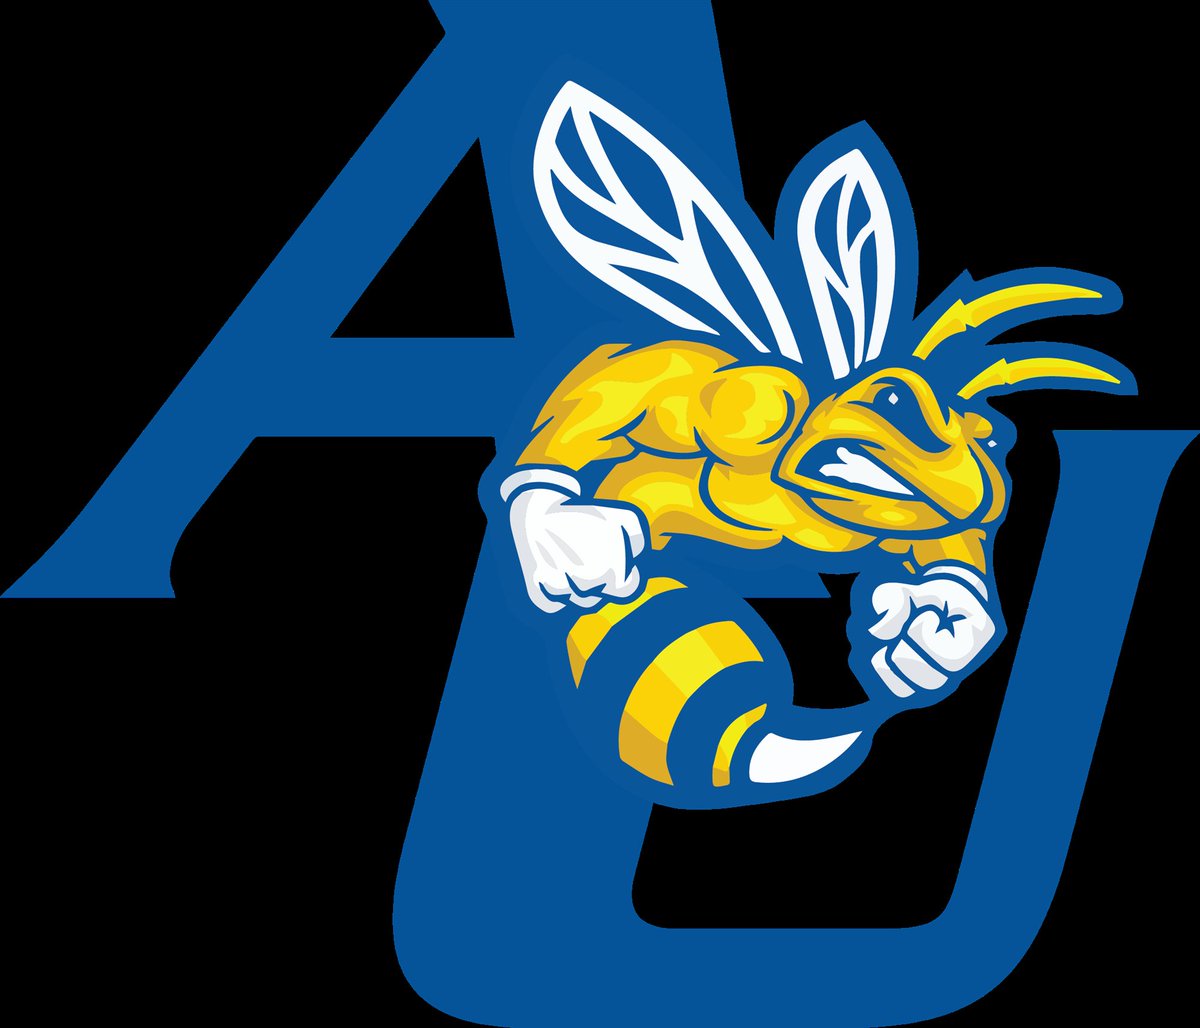 Special thanks to Allen University football for stopping by THE Rock today to recruit our players. @CoachMcRae77